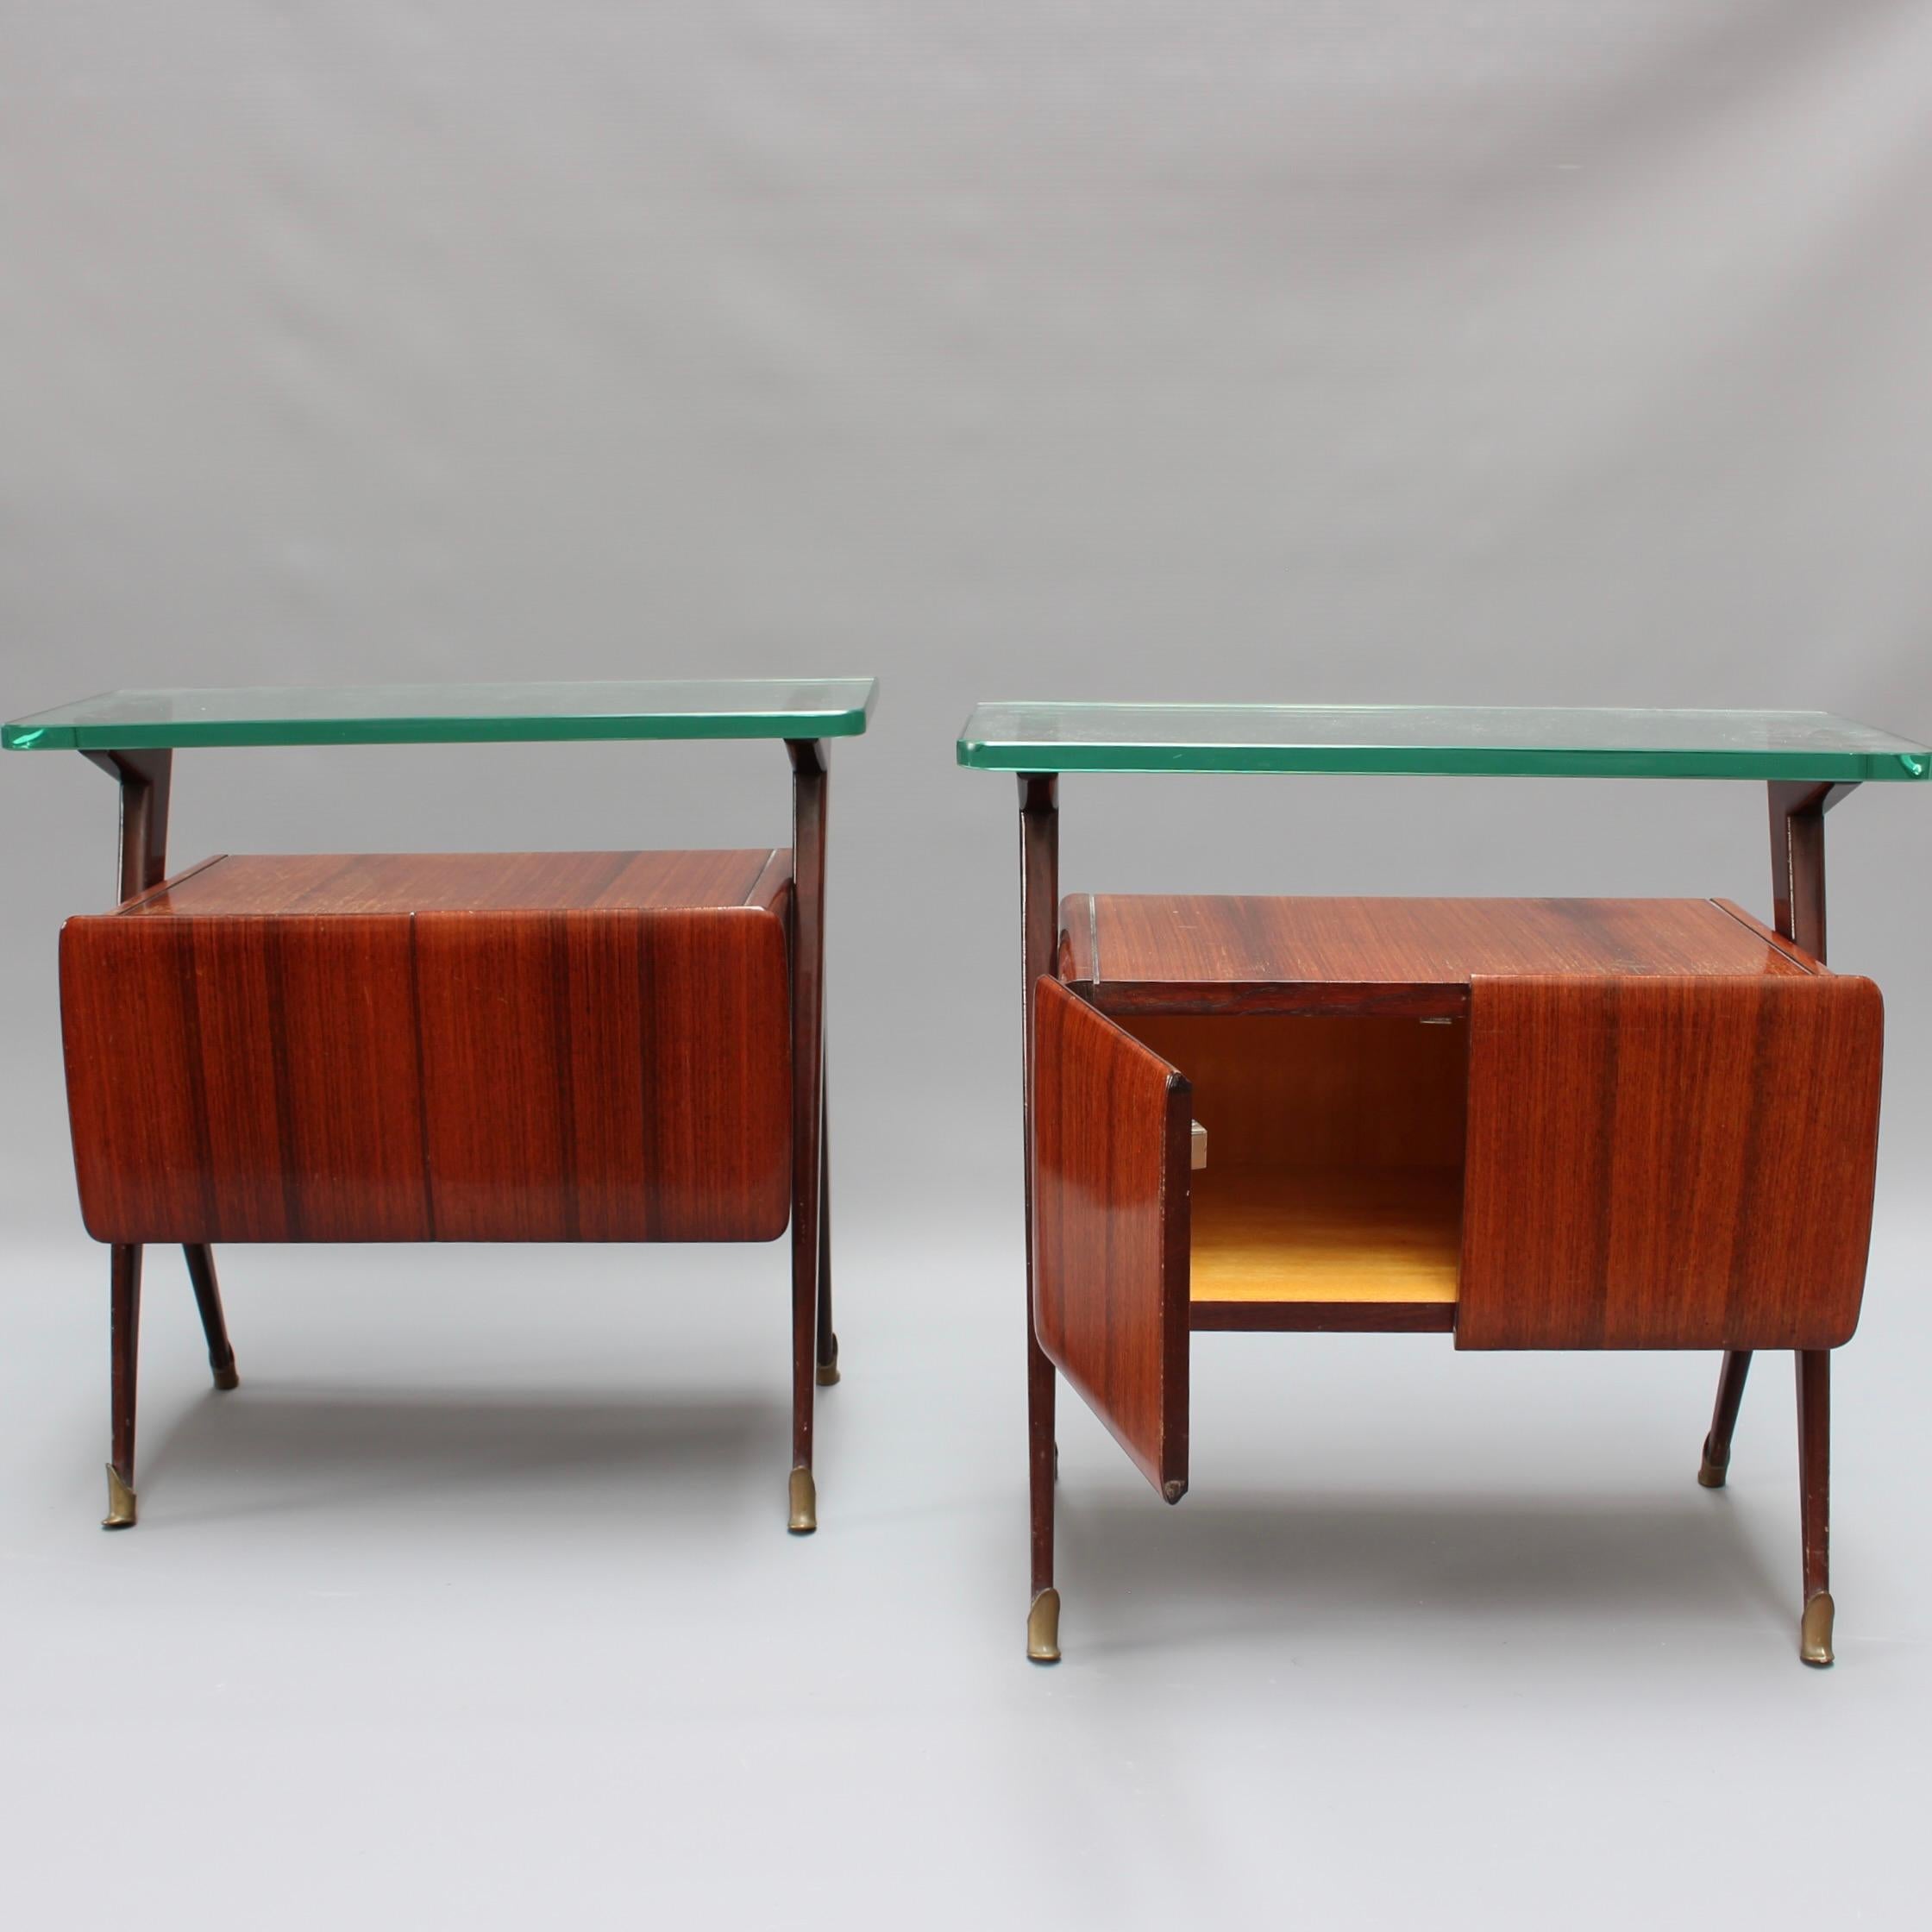 Pair of Vintage Italian Bedside Tables Attributed to Silvio Cavatorta  For Sale 4